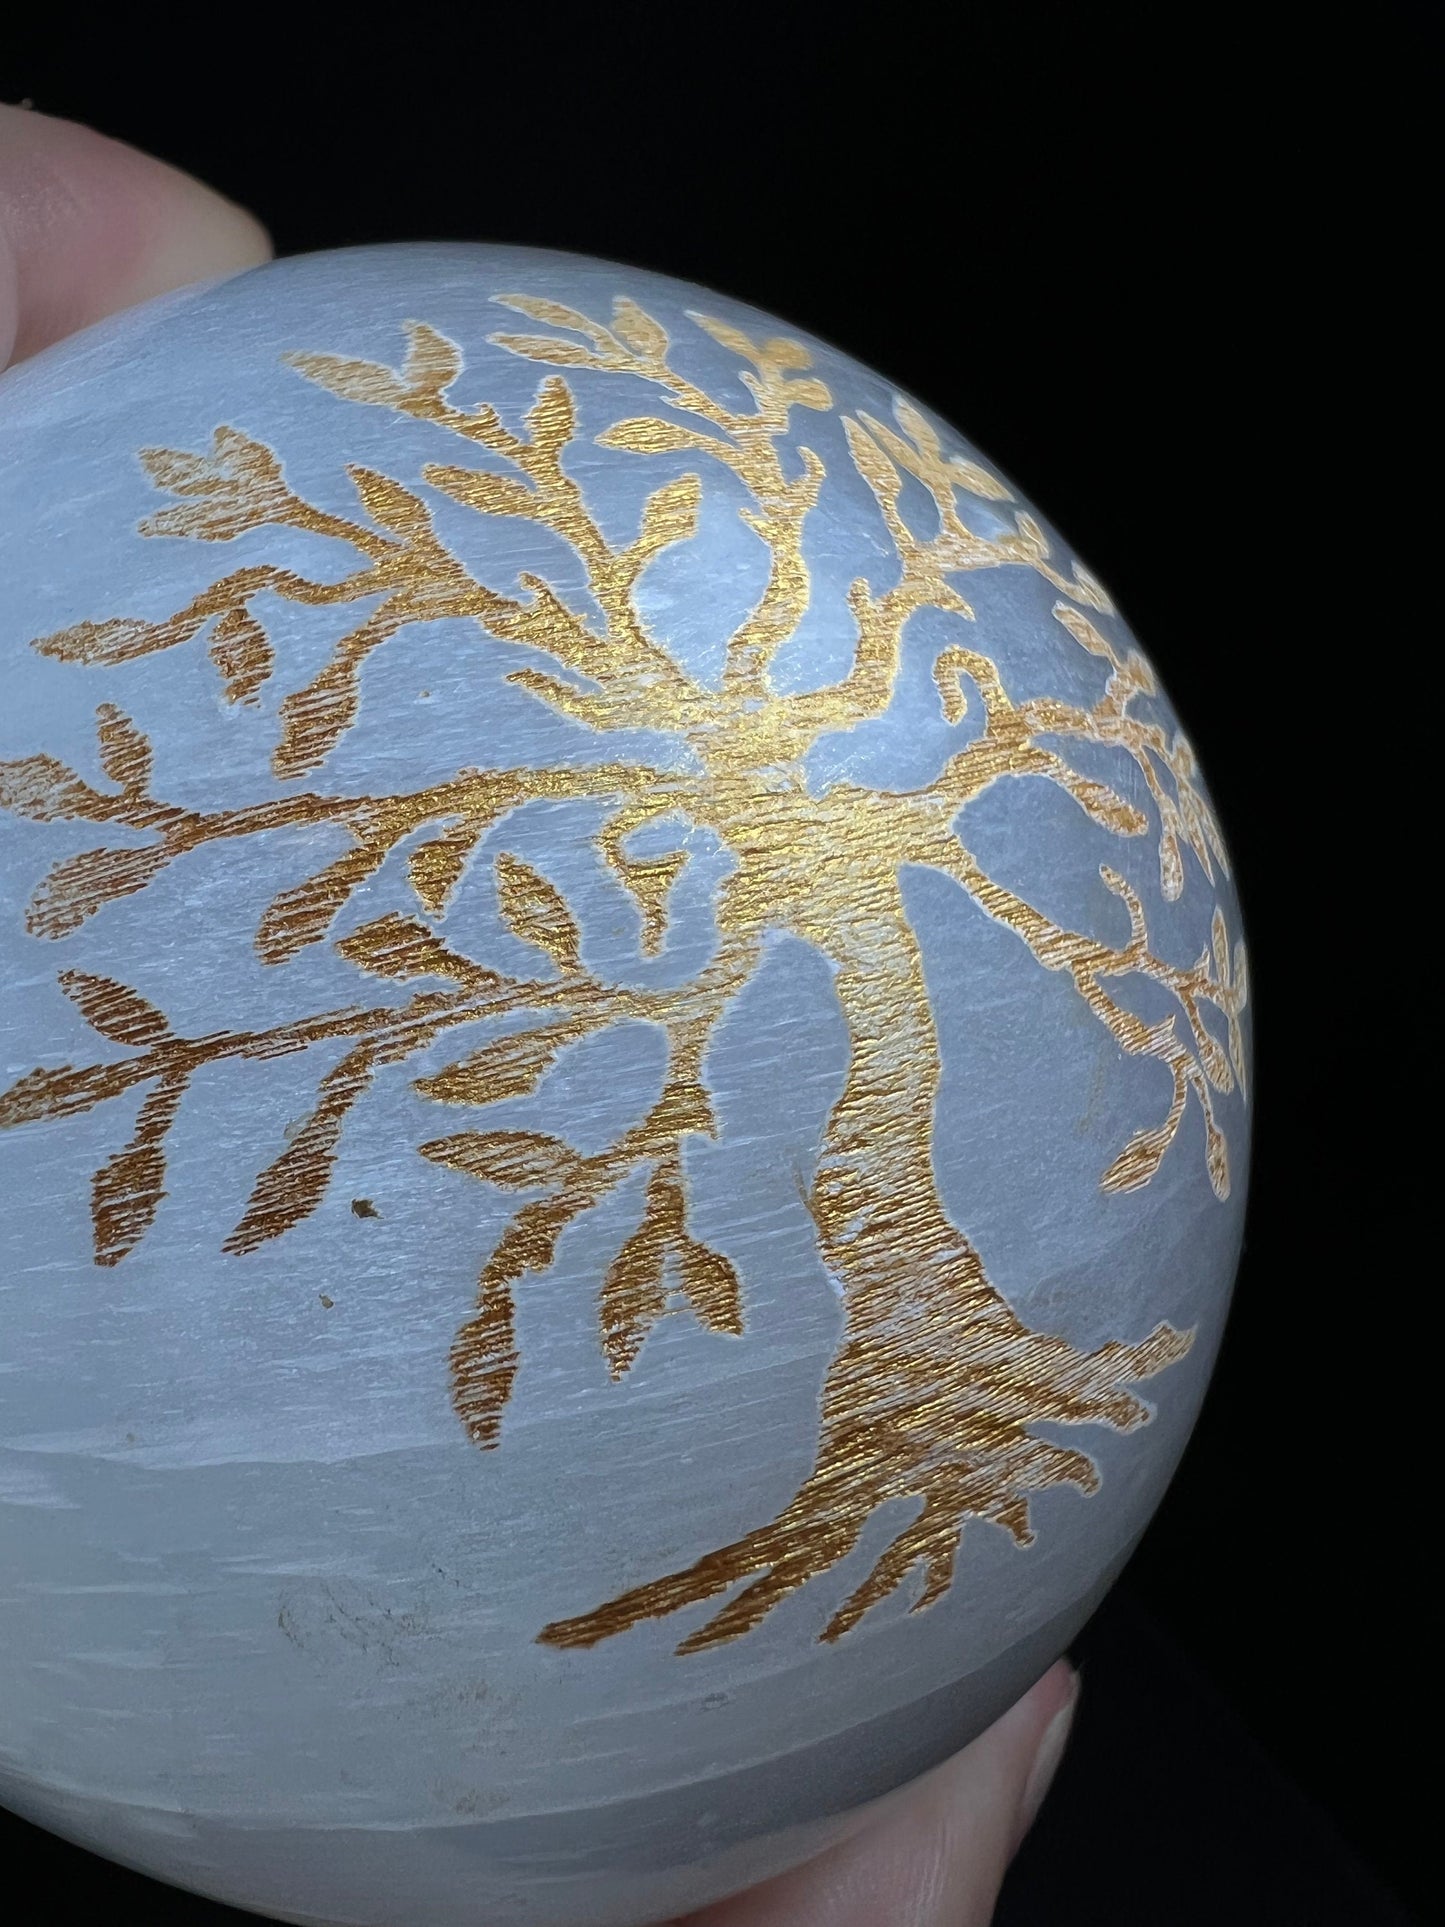 Gold Tree Of Life Carving On A Selenite Sphere- Home Decor, Statement Piece, Gift, Charging Crystal, Crystal Healing